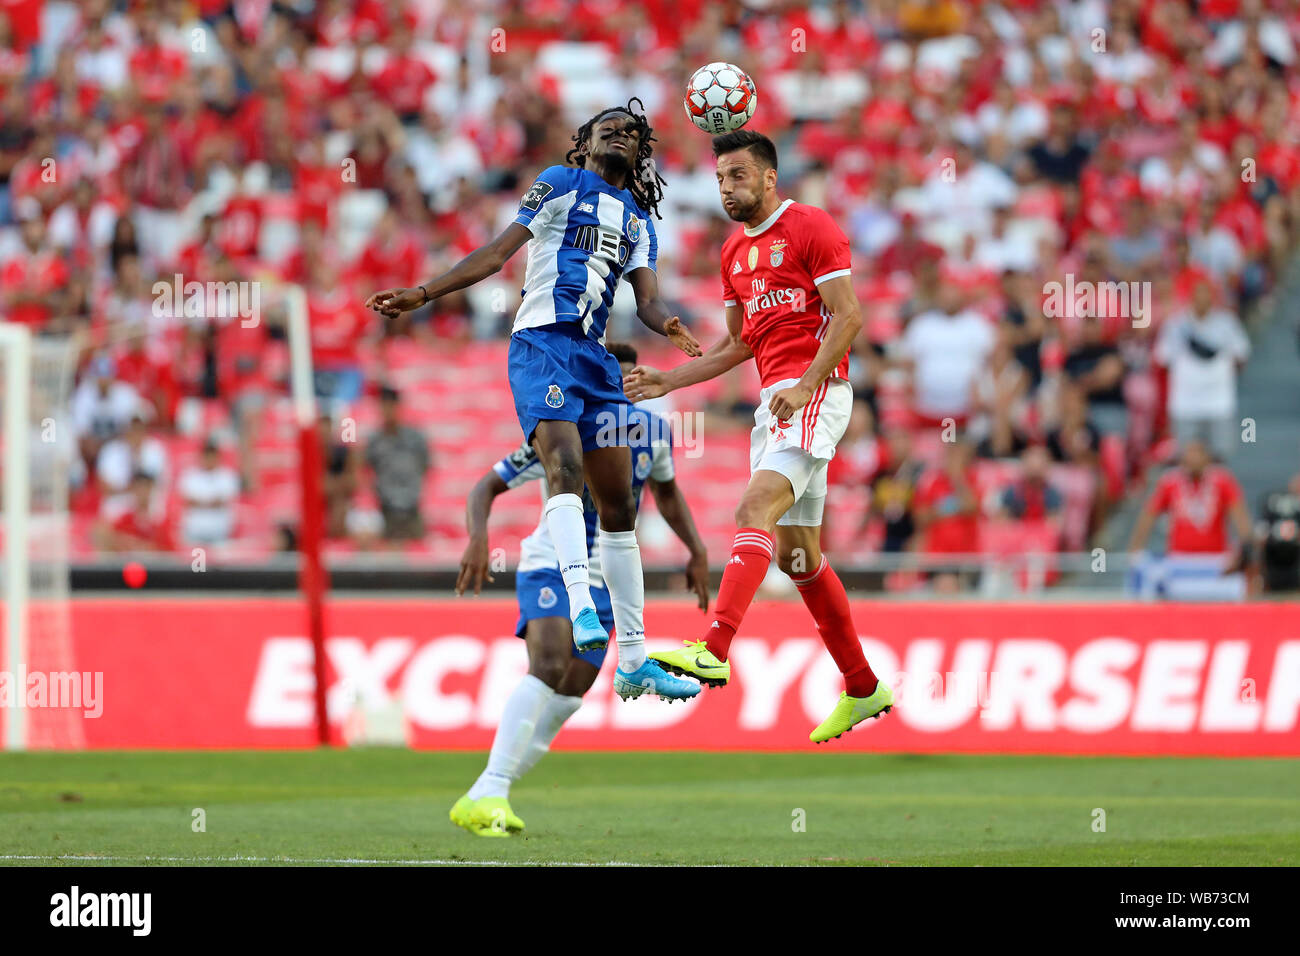 Romário Baró of FC Porto (L) and  Andreas Samaris of SL Benfica (R) are seen in action during the League NOS 2019/20 football match between SL Benfica and FC Porto in Lisbon.(Final score; SL Benfica 0:2 FC Porto) Stock Photo